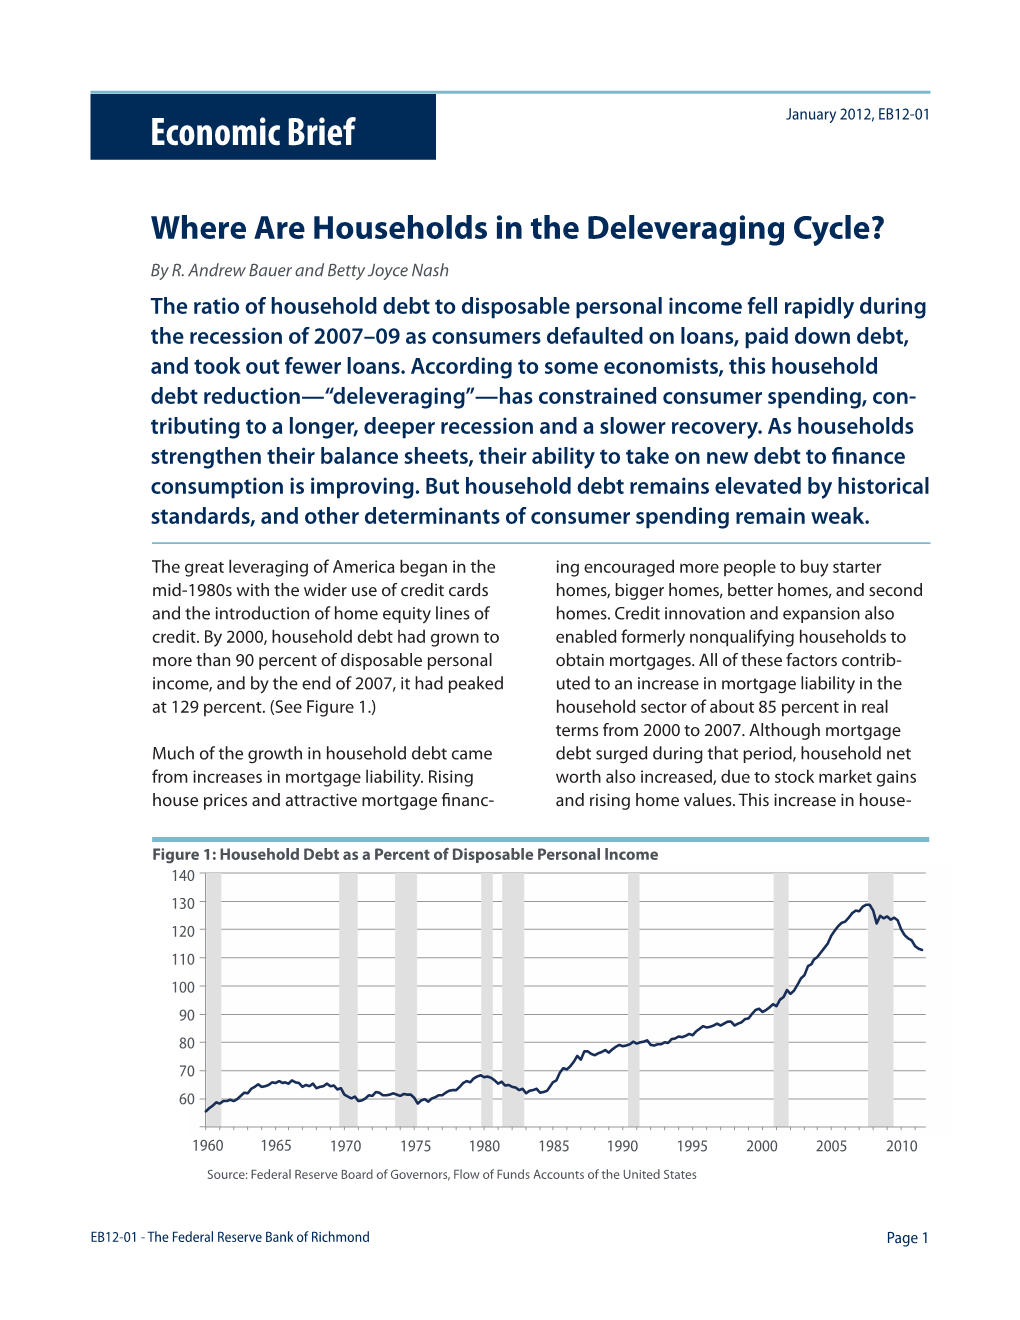 Where Are Households in the Deleveraging Cycle? by R